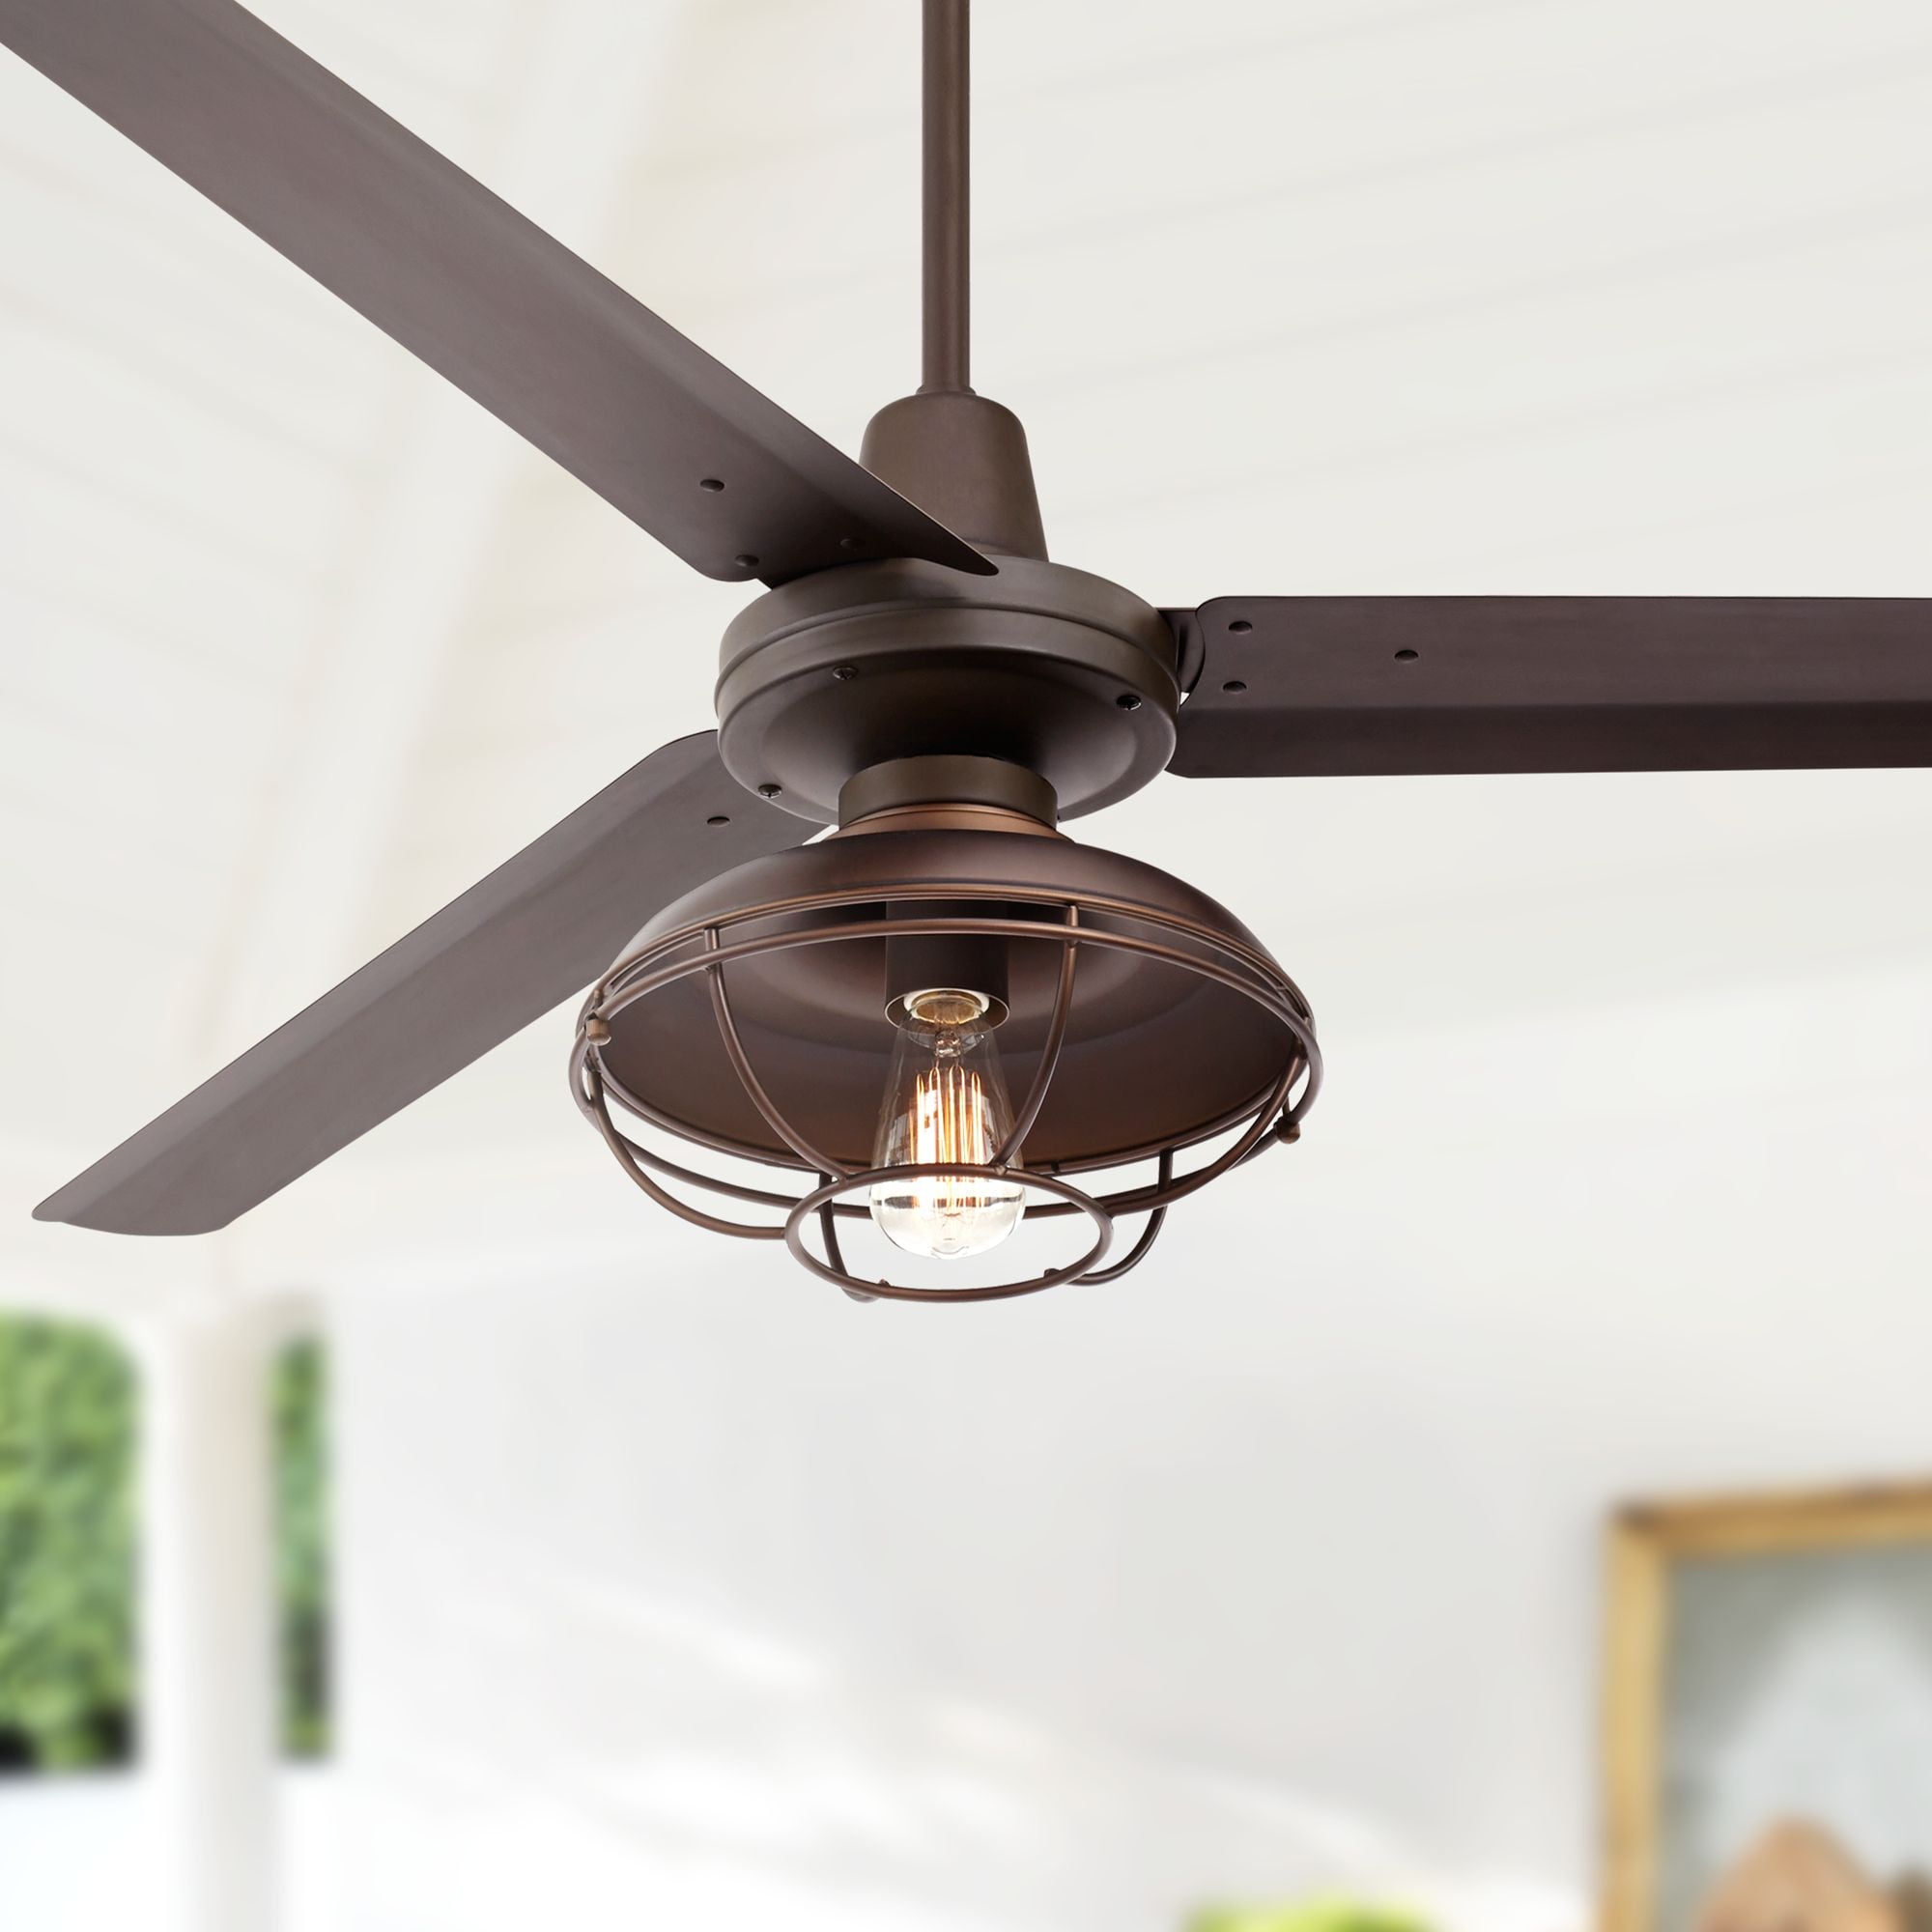 60" Casa Vieja Industrial Outdoor Ceiling Fan with Light LED Remote Control Oil Rubbed Bronze